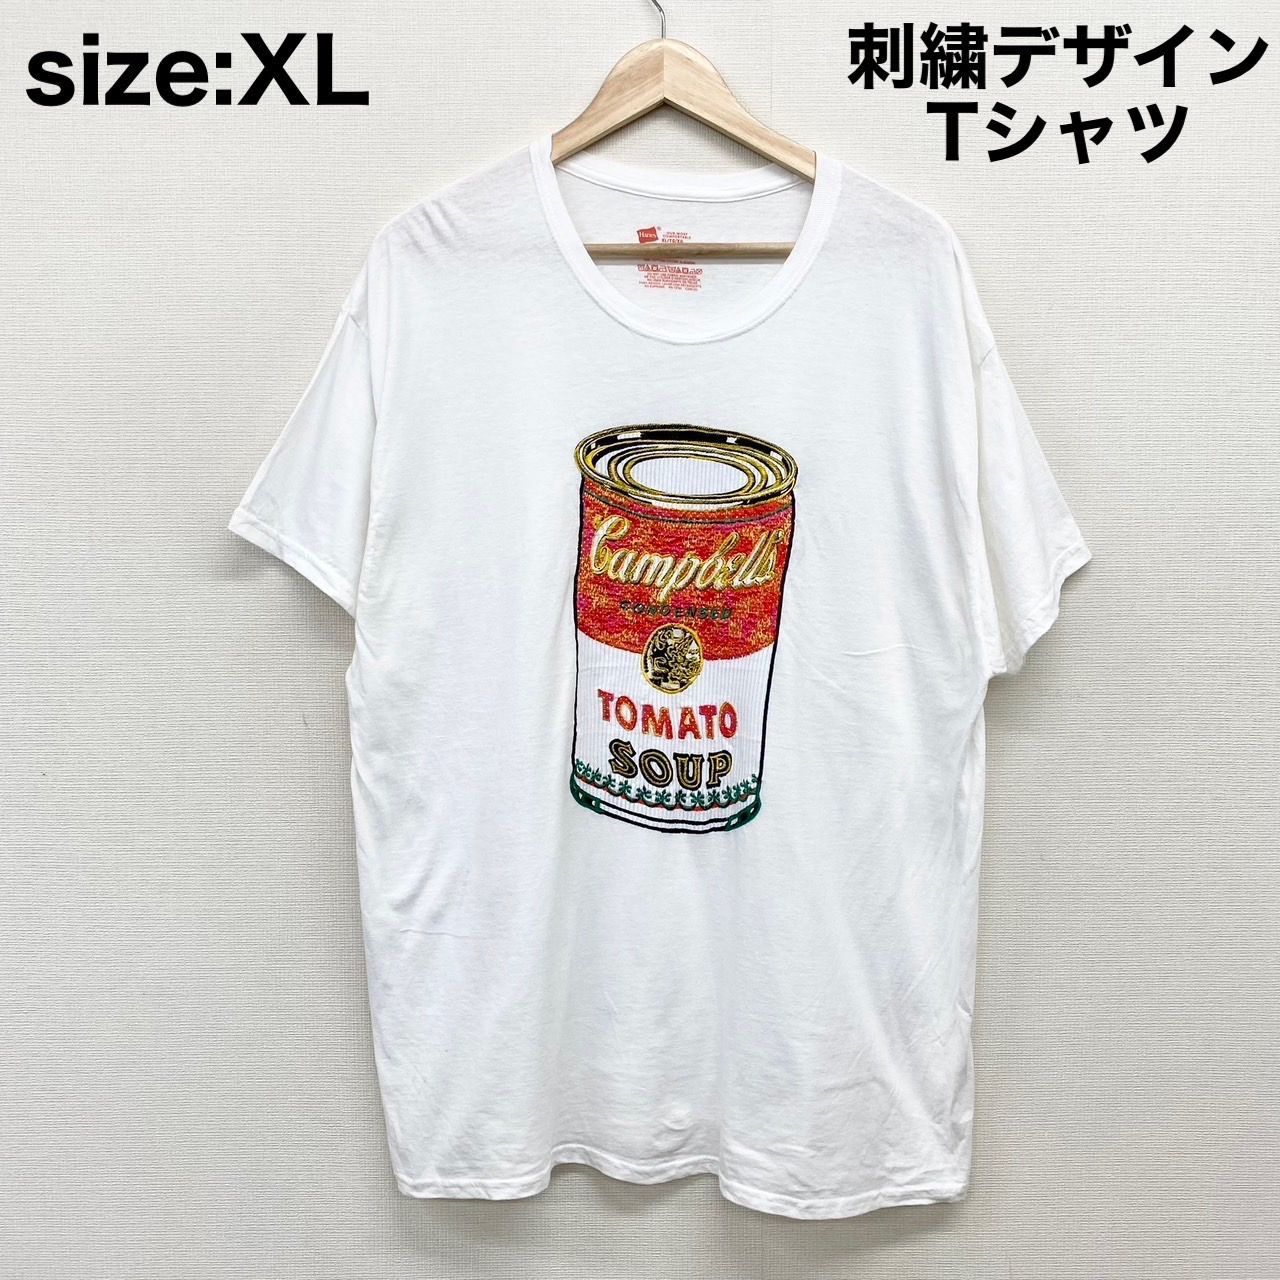 US古着 キャンベル缶 刺繍デザイン Tシャツ 半袖 Campbell's Soup Cans